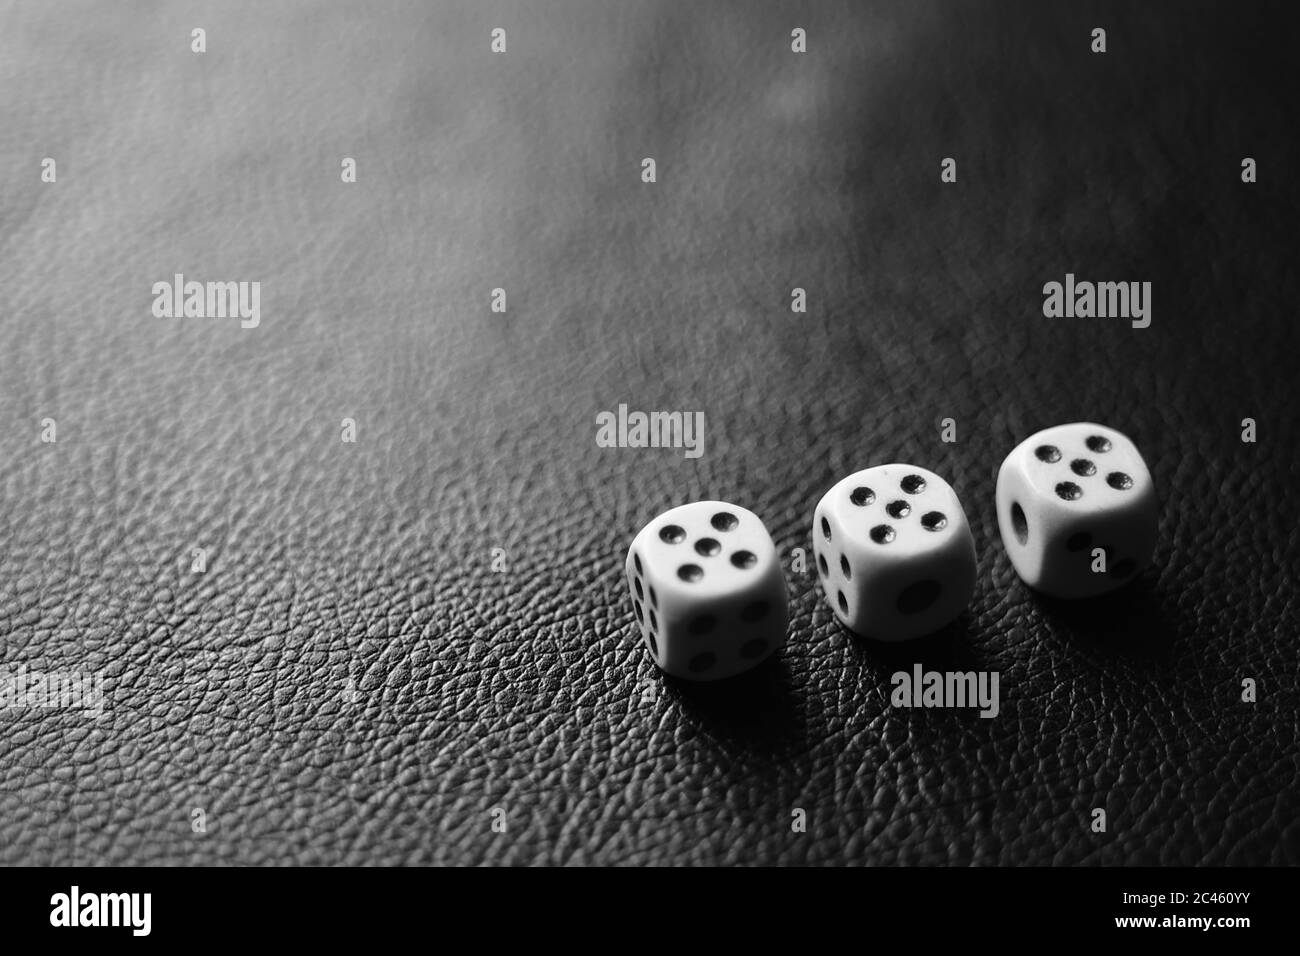 Three dice with fives on a black leather table in corner. Bw photo Stock Photo